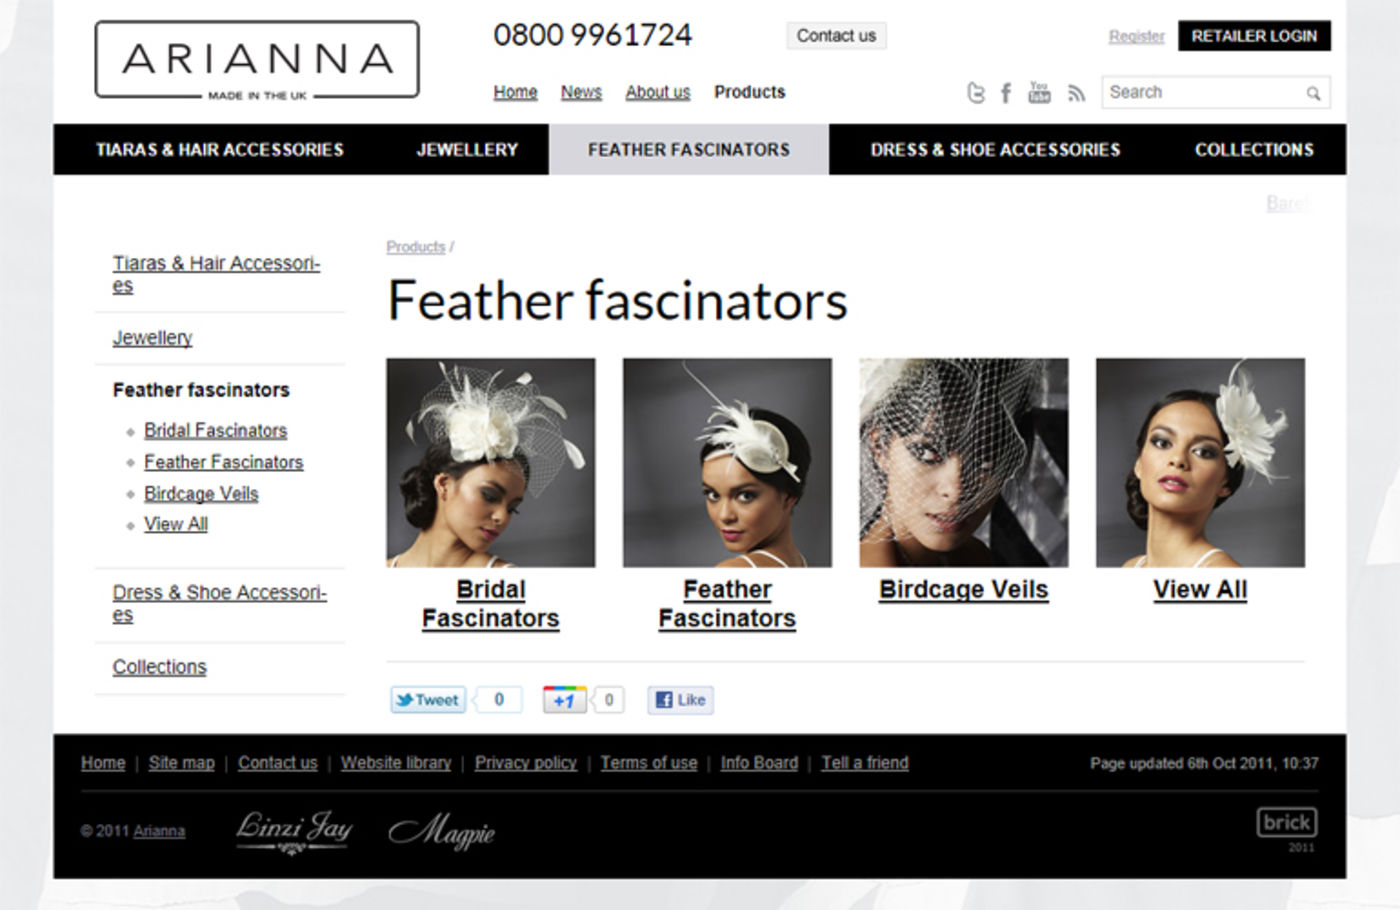 Arianna Products